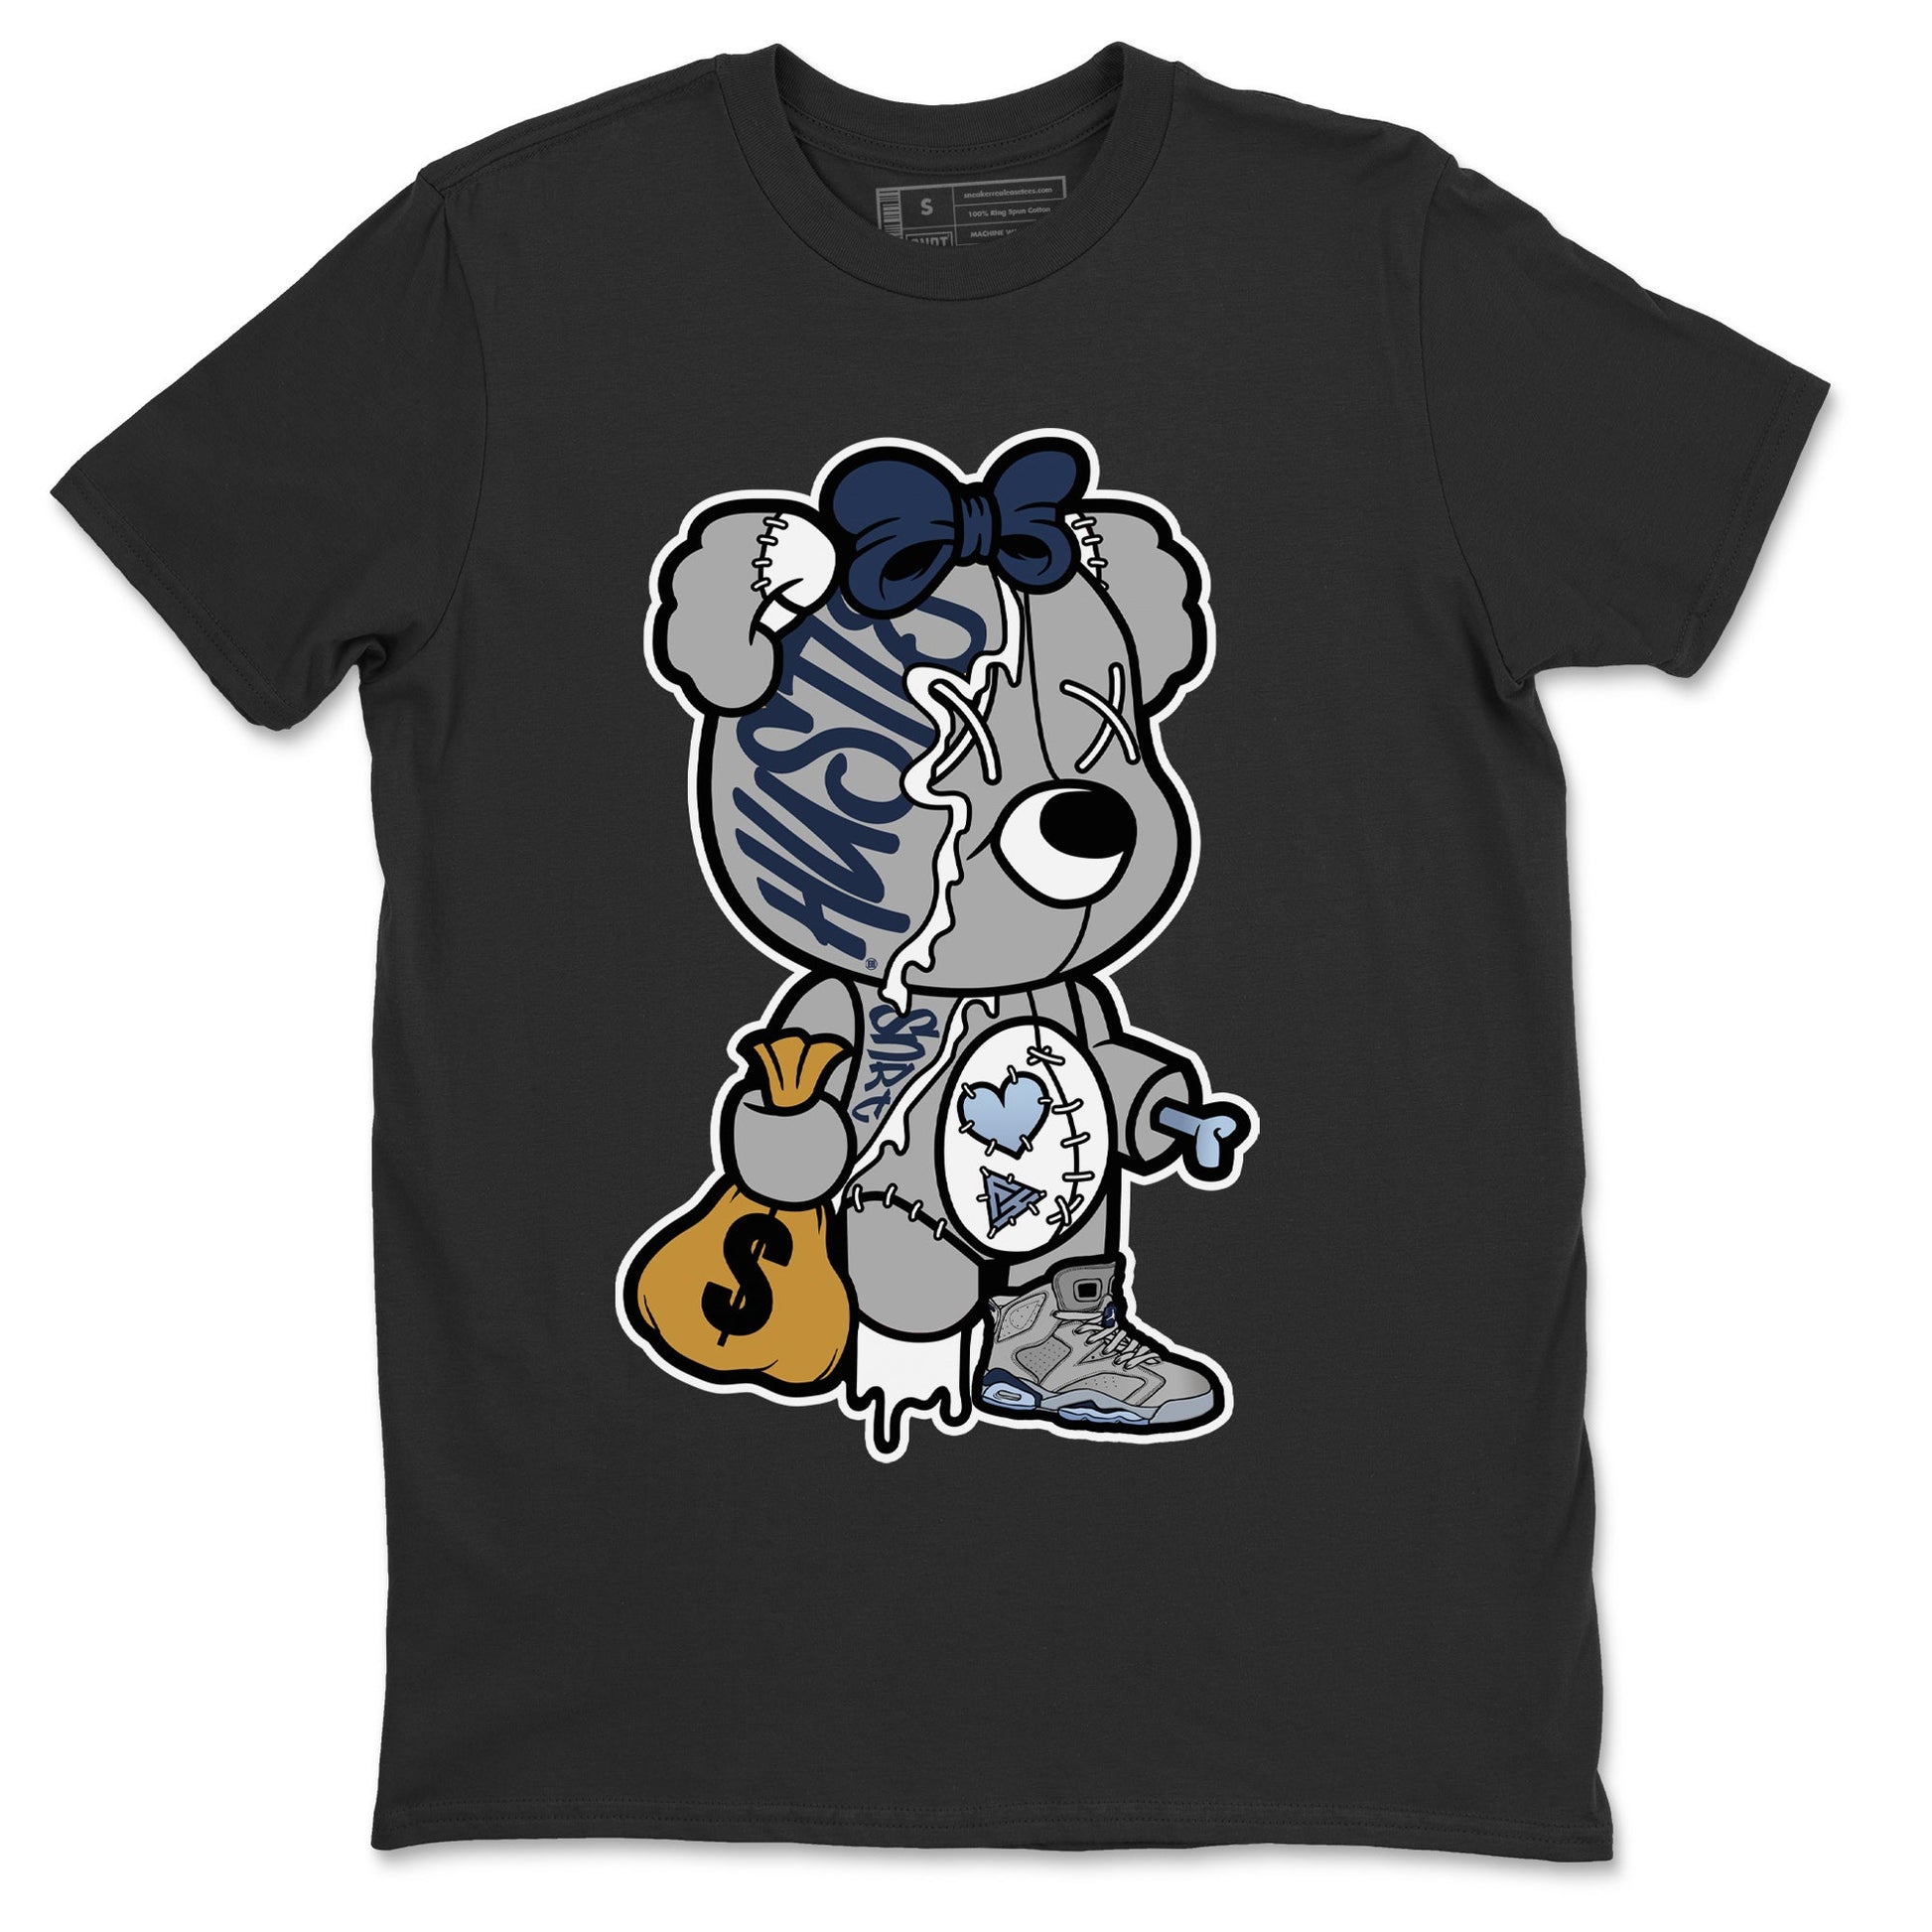 Jordan 6 Georgetown Sneaker Match Tees Stitched Hustle Bear Sneaker Tees Jordan 6 Georgetown Sneaker Release Tees Unisex Shirts